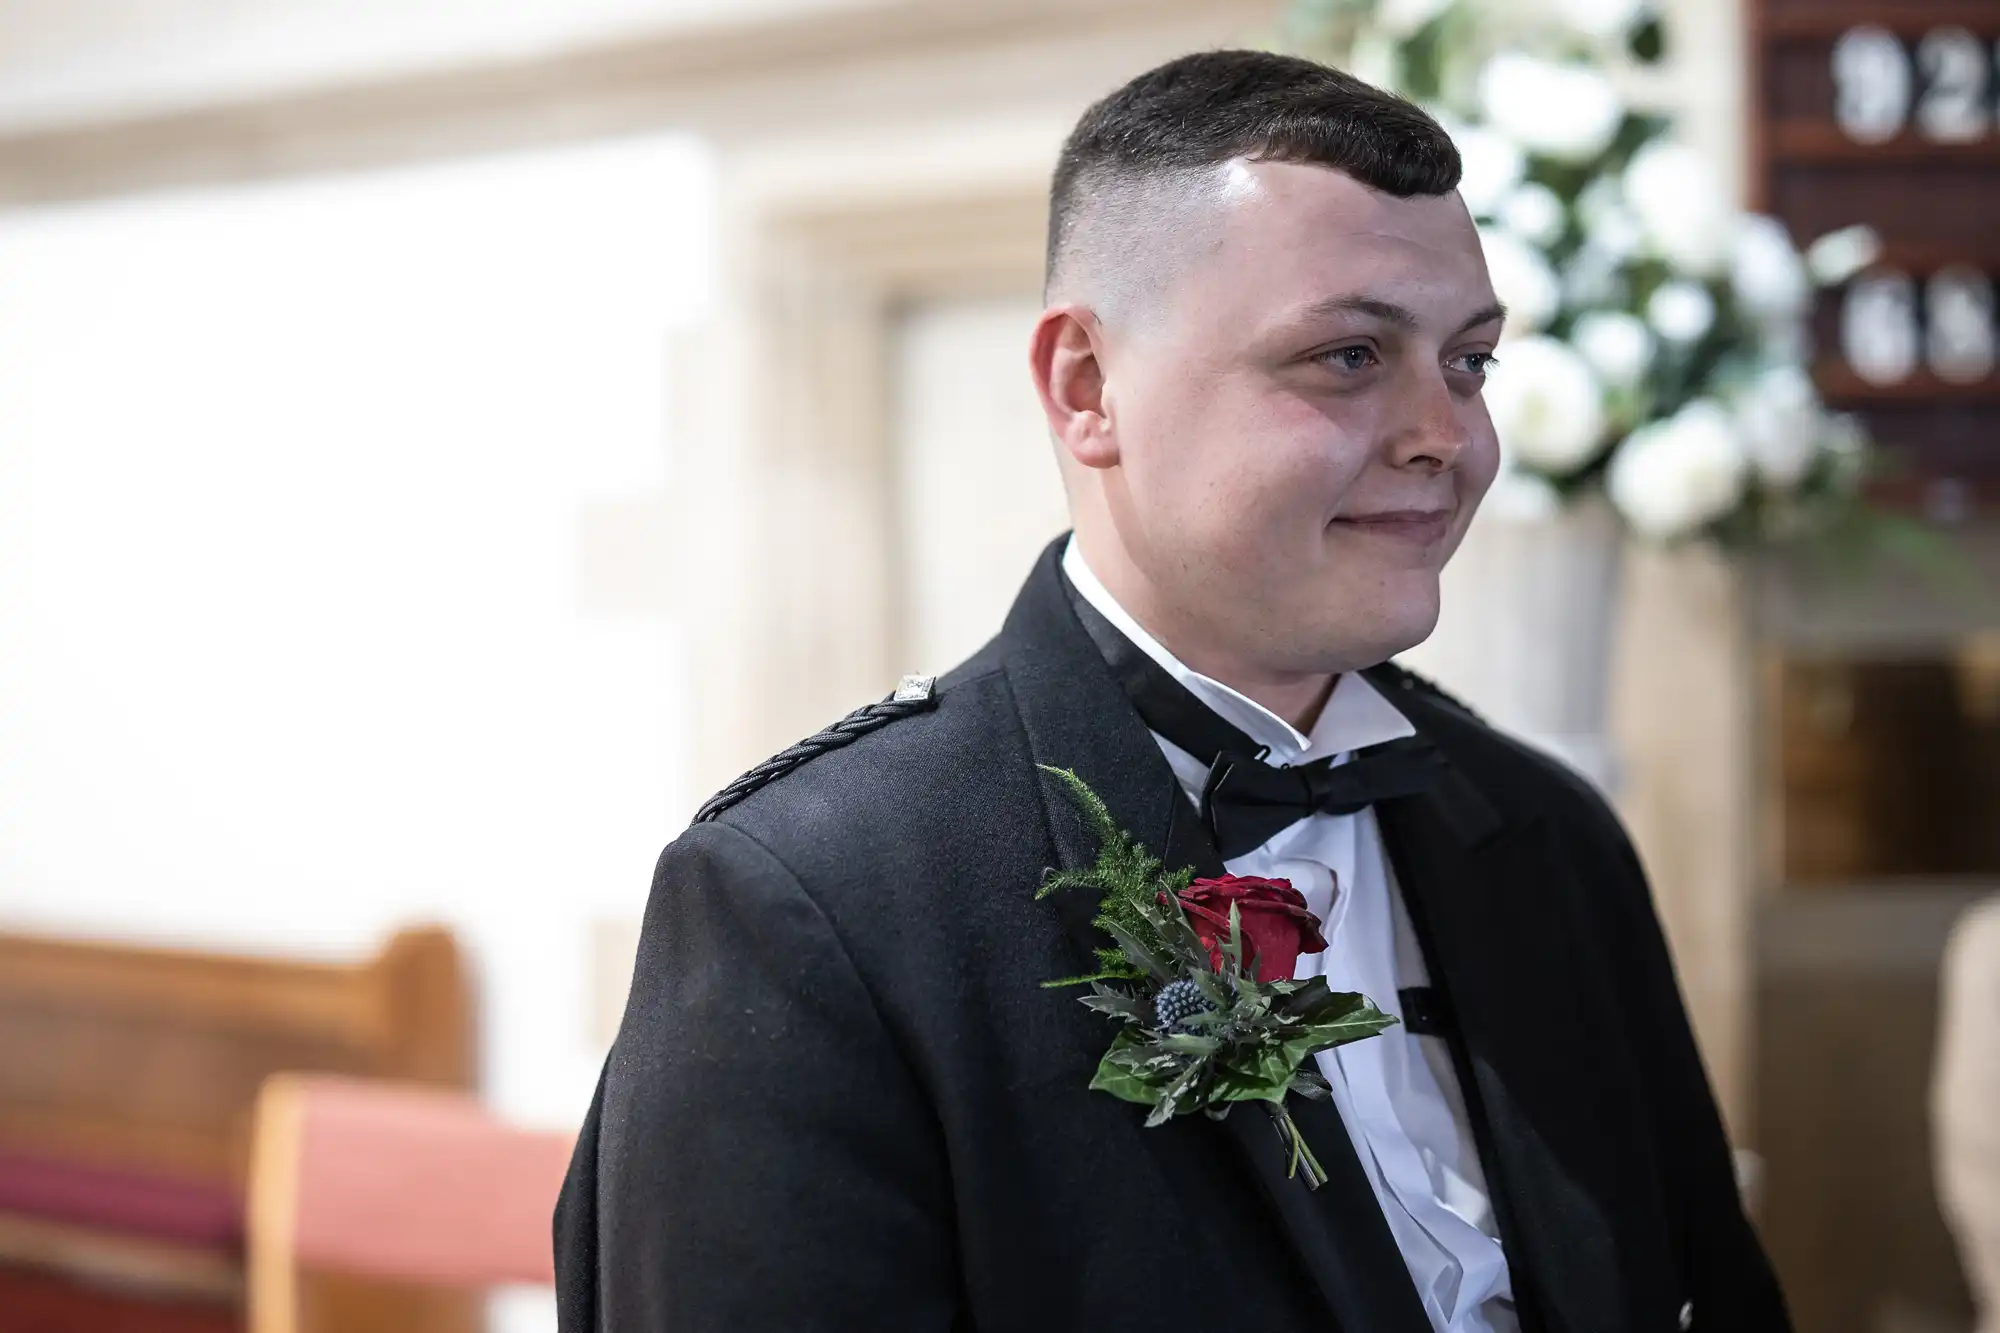 A man in a formal suit with a red rose boutonniere smiling inside a church.